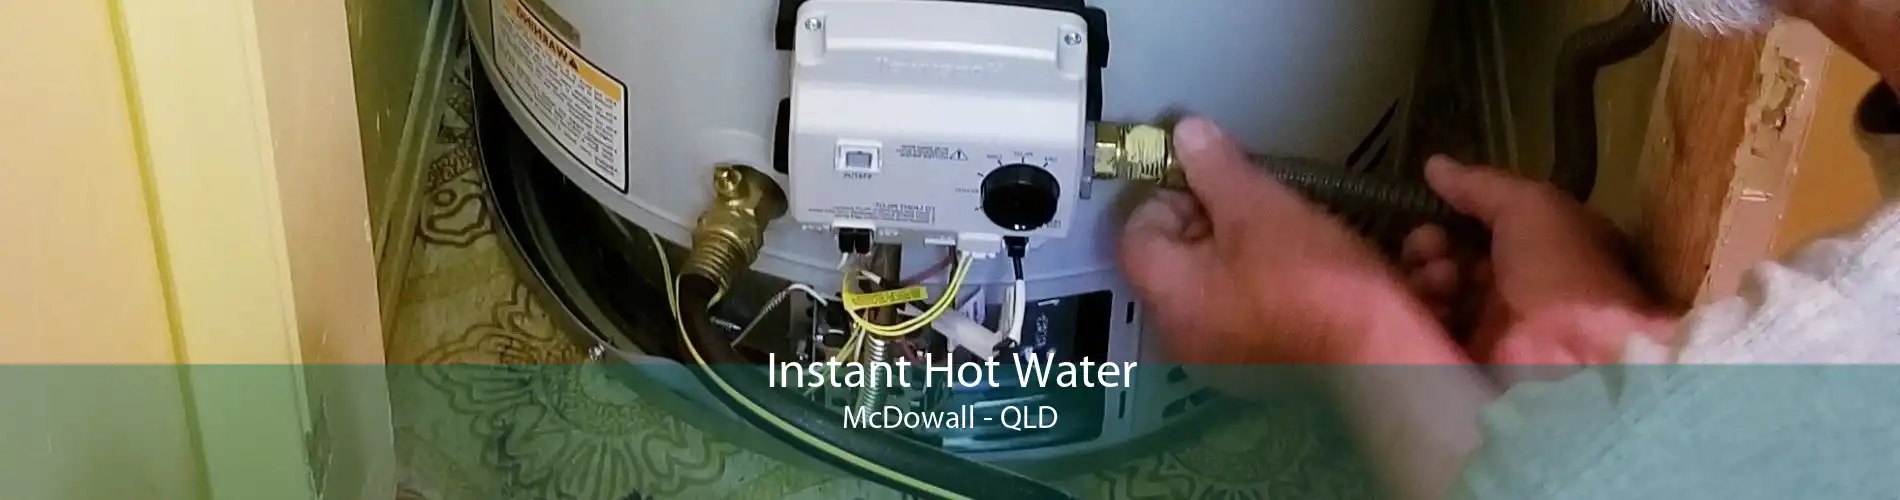 Instant Hot Water McDowall - QLD